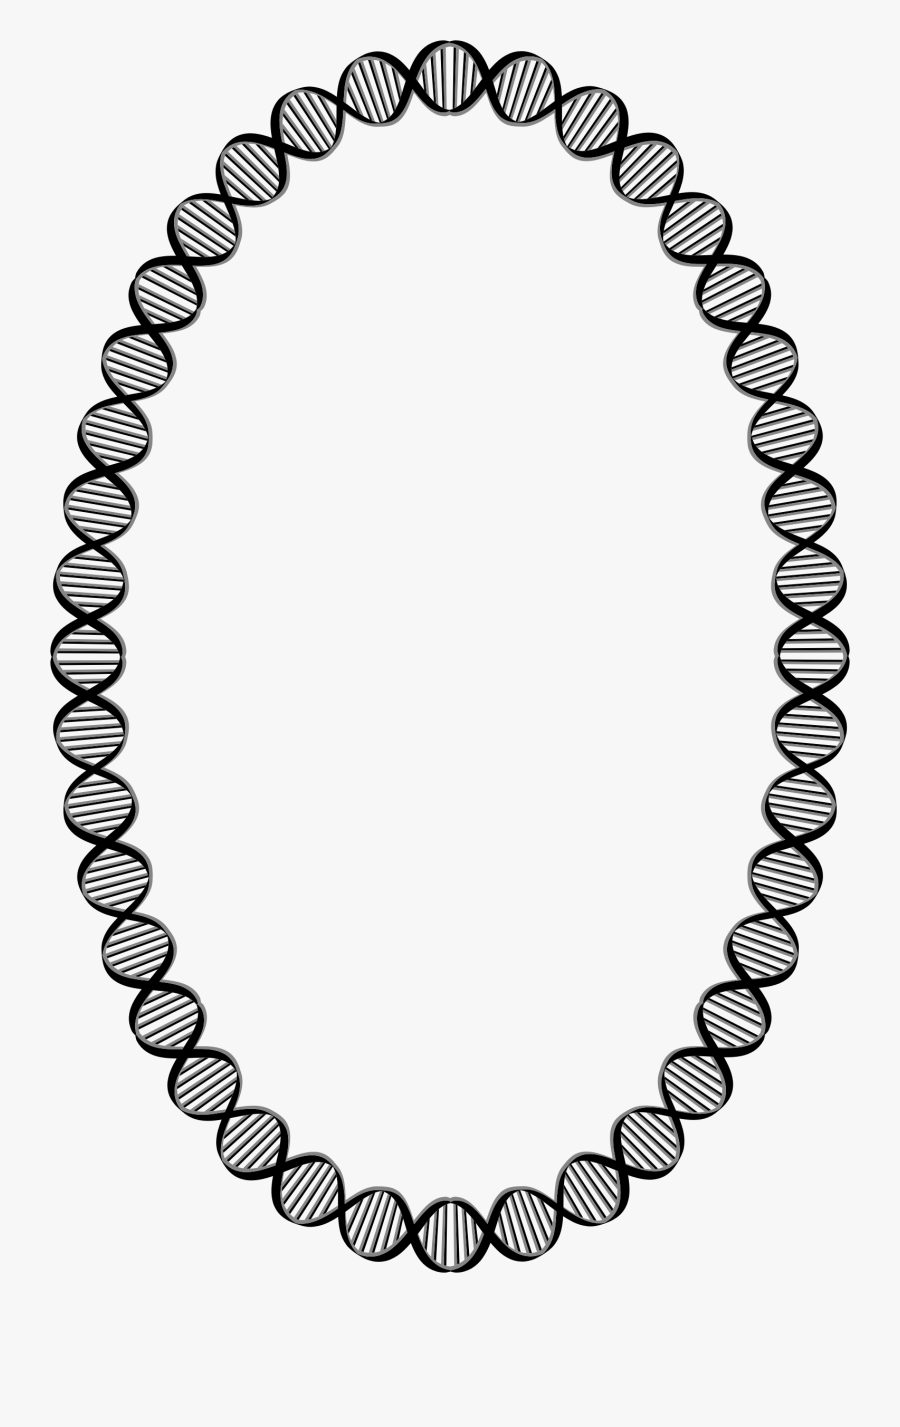 Squiggly Clipart Border - Dna Oval, Transparent Clipart